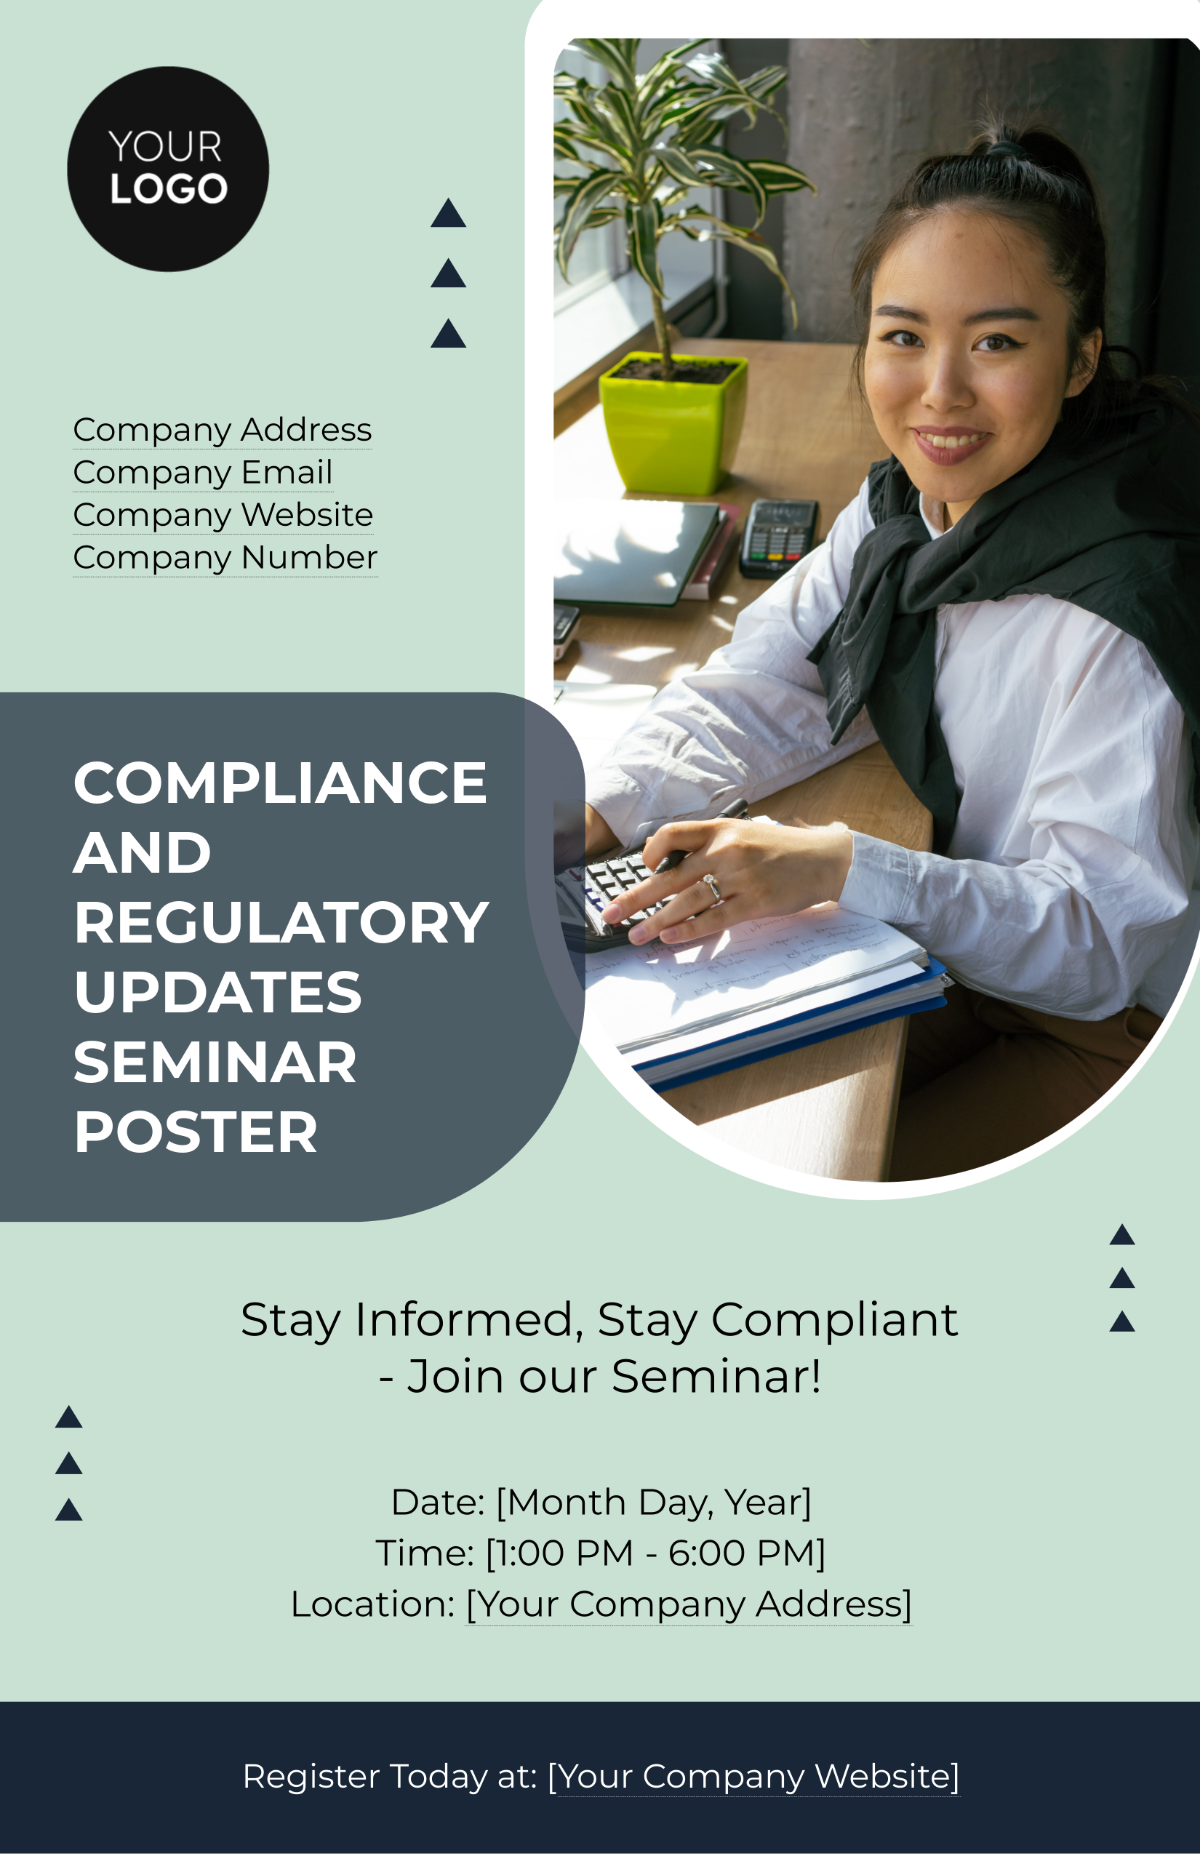 Free Compliance and Regulatory Updates Seminar Poster Template